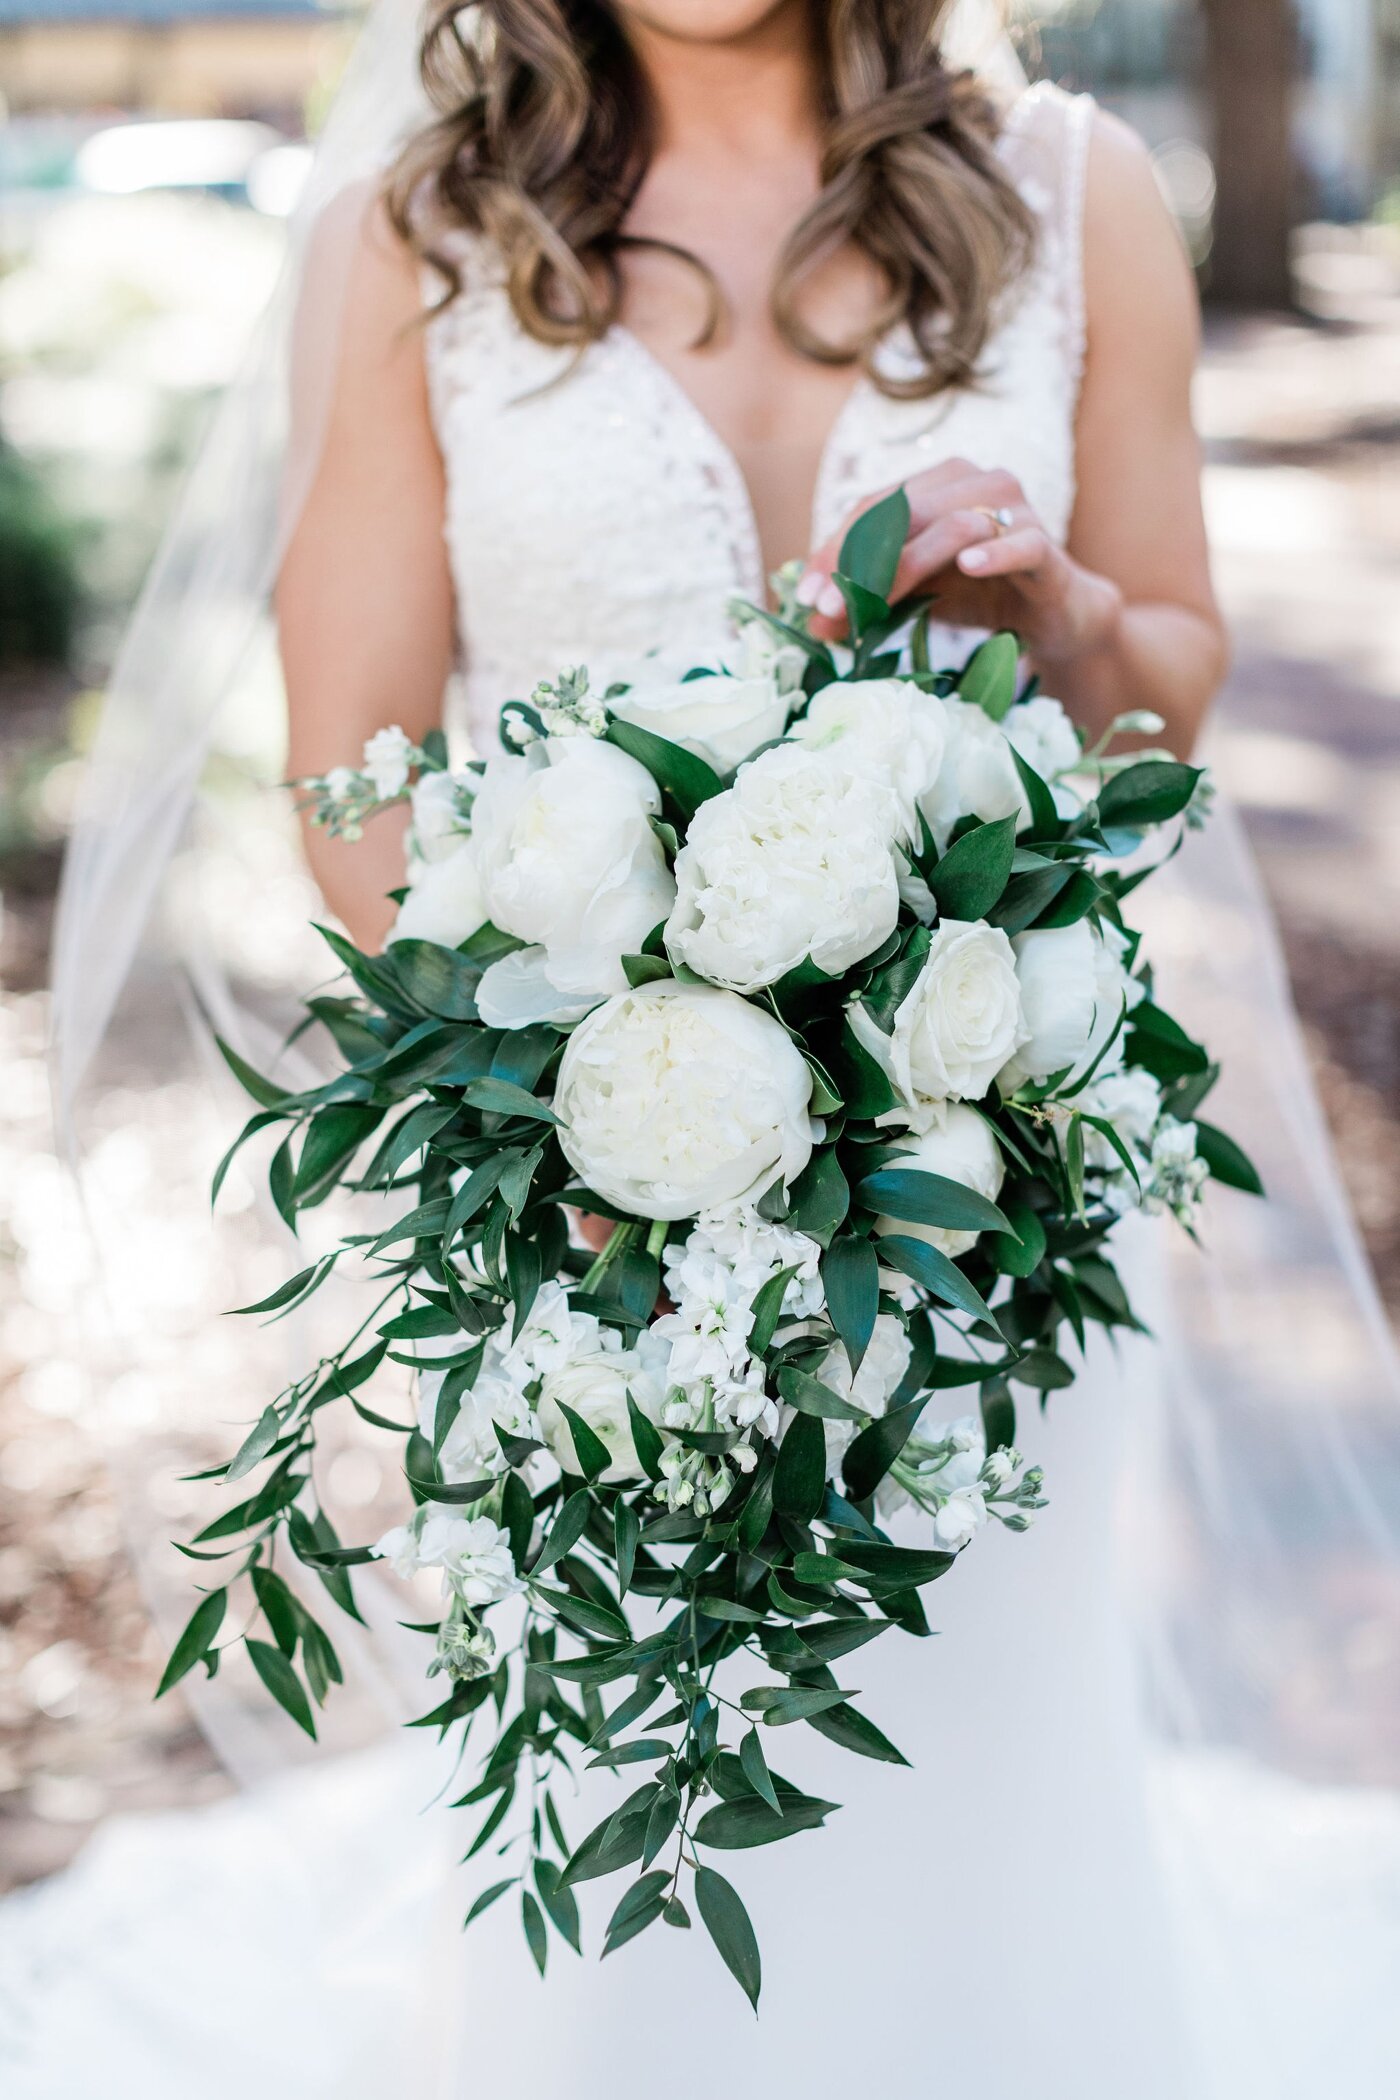 Classic green and white wedding at Perry Lane Hotel in Savannah